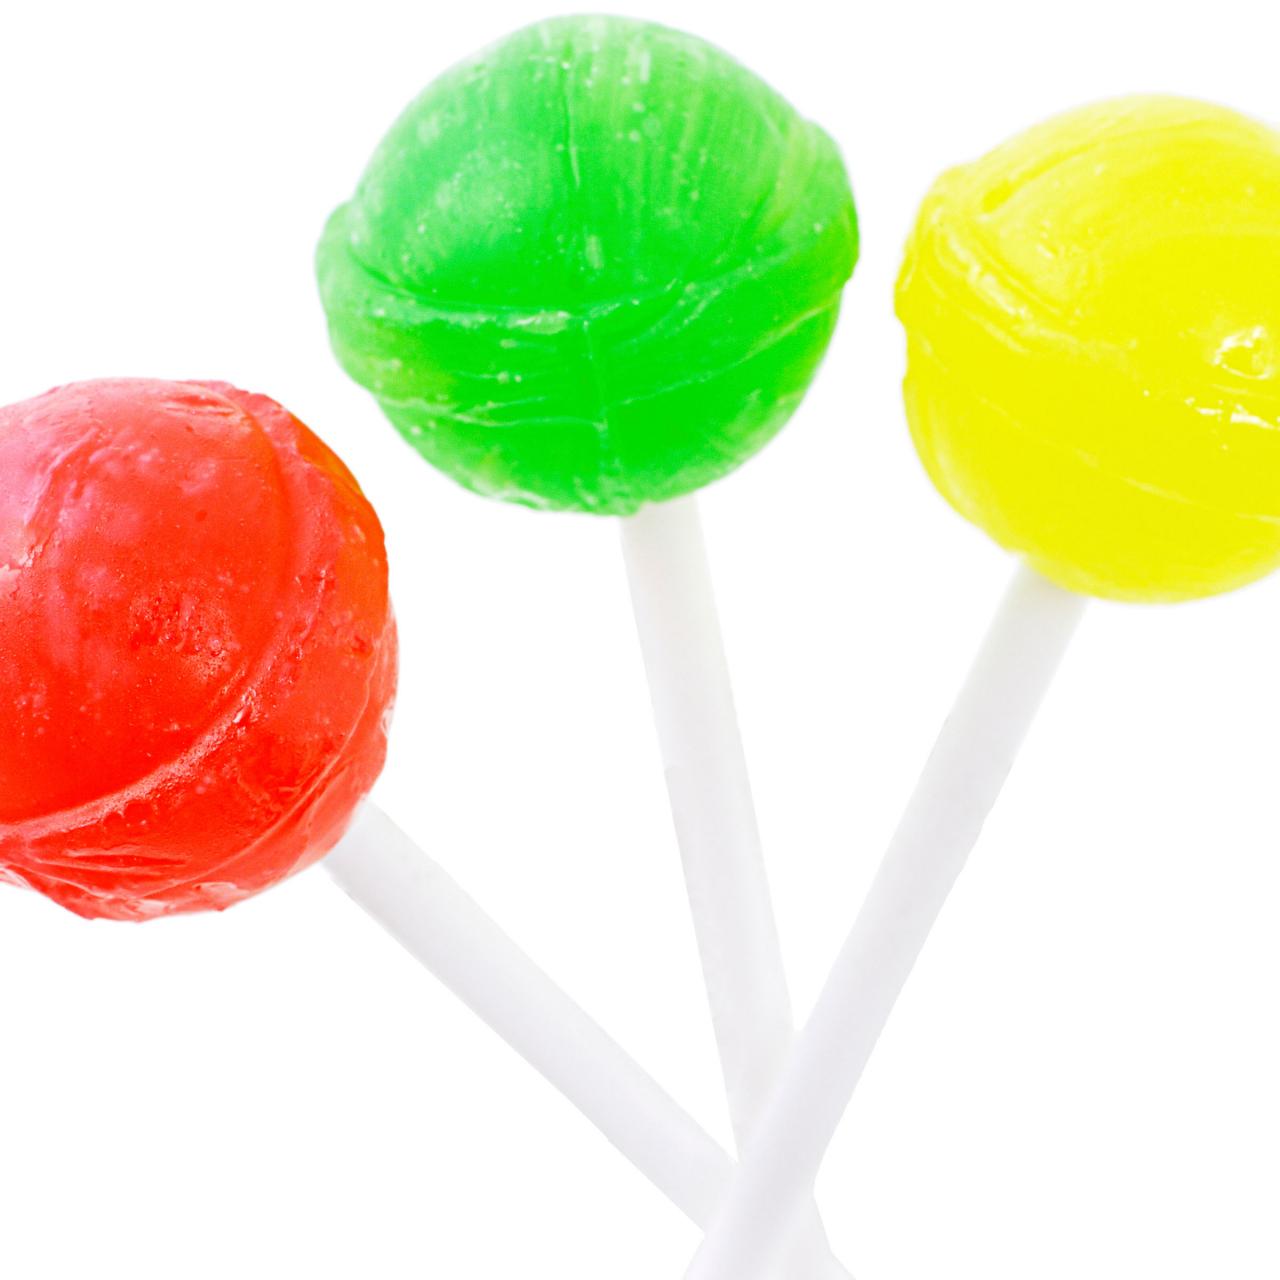 lolipop - Wiktionary, the free dictionary